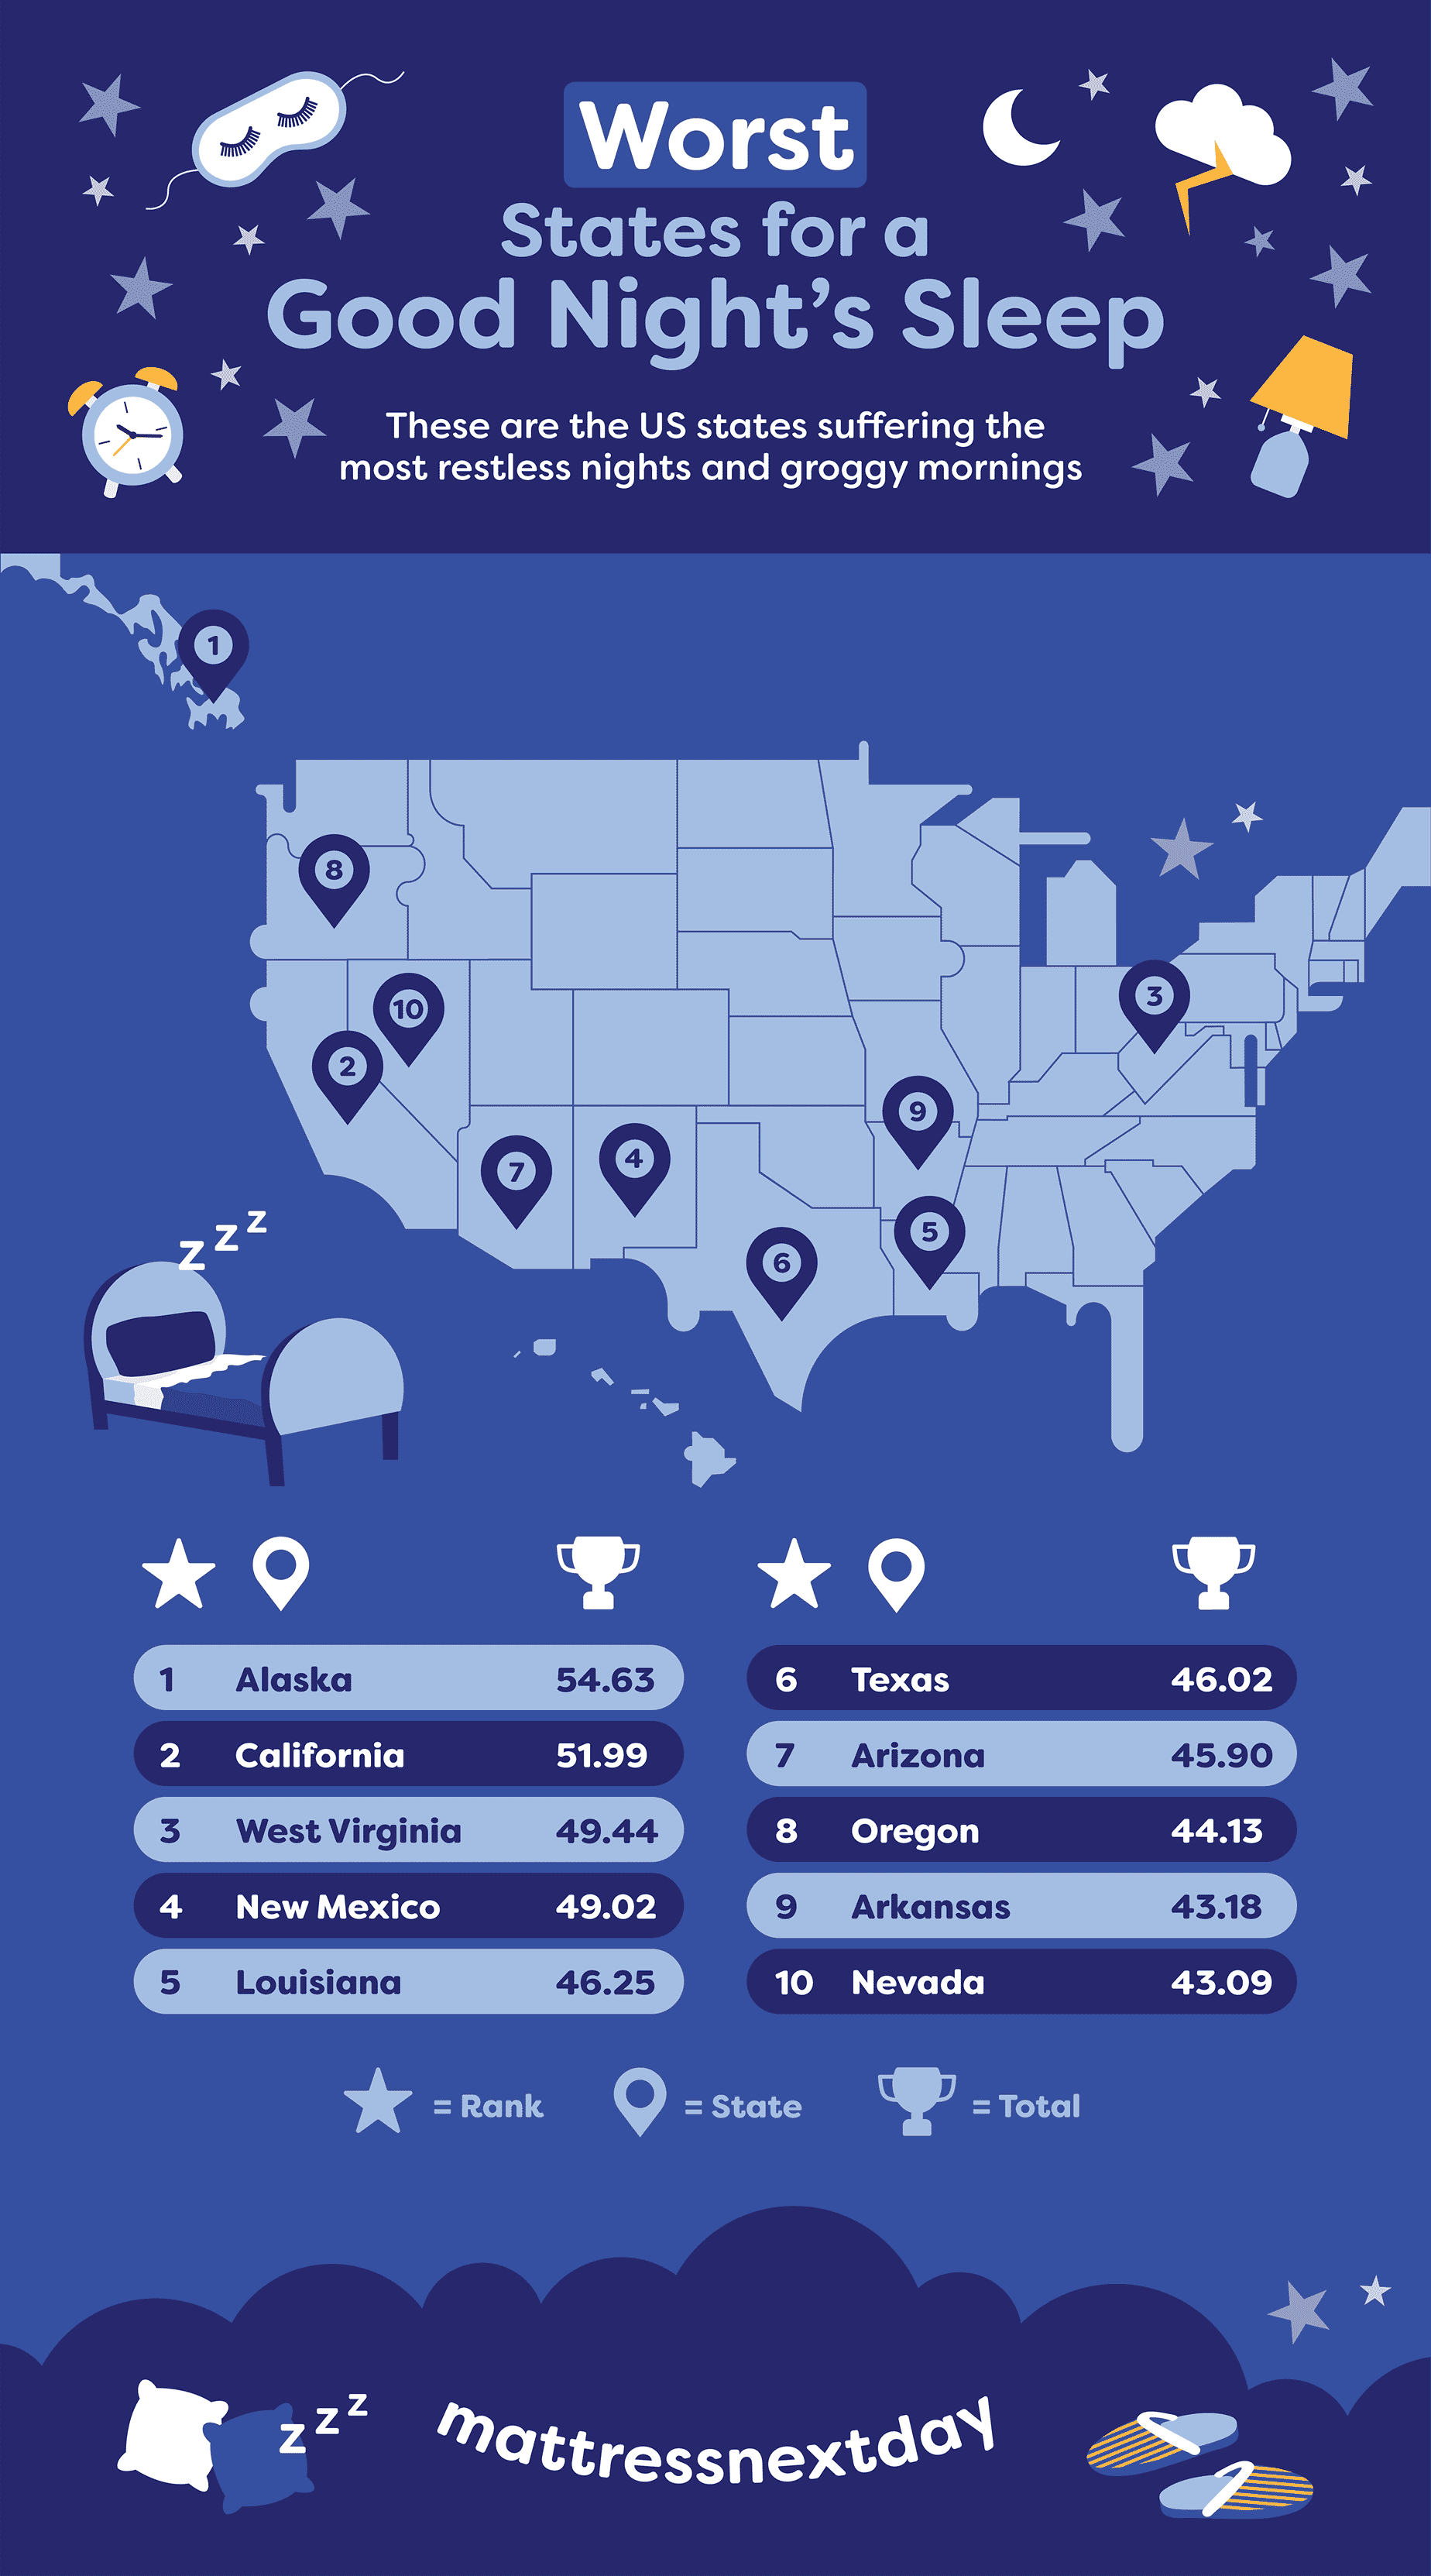 Infographic depicting the worst states for a good night's sleep.